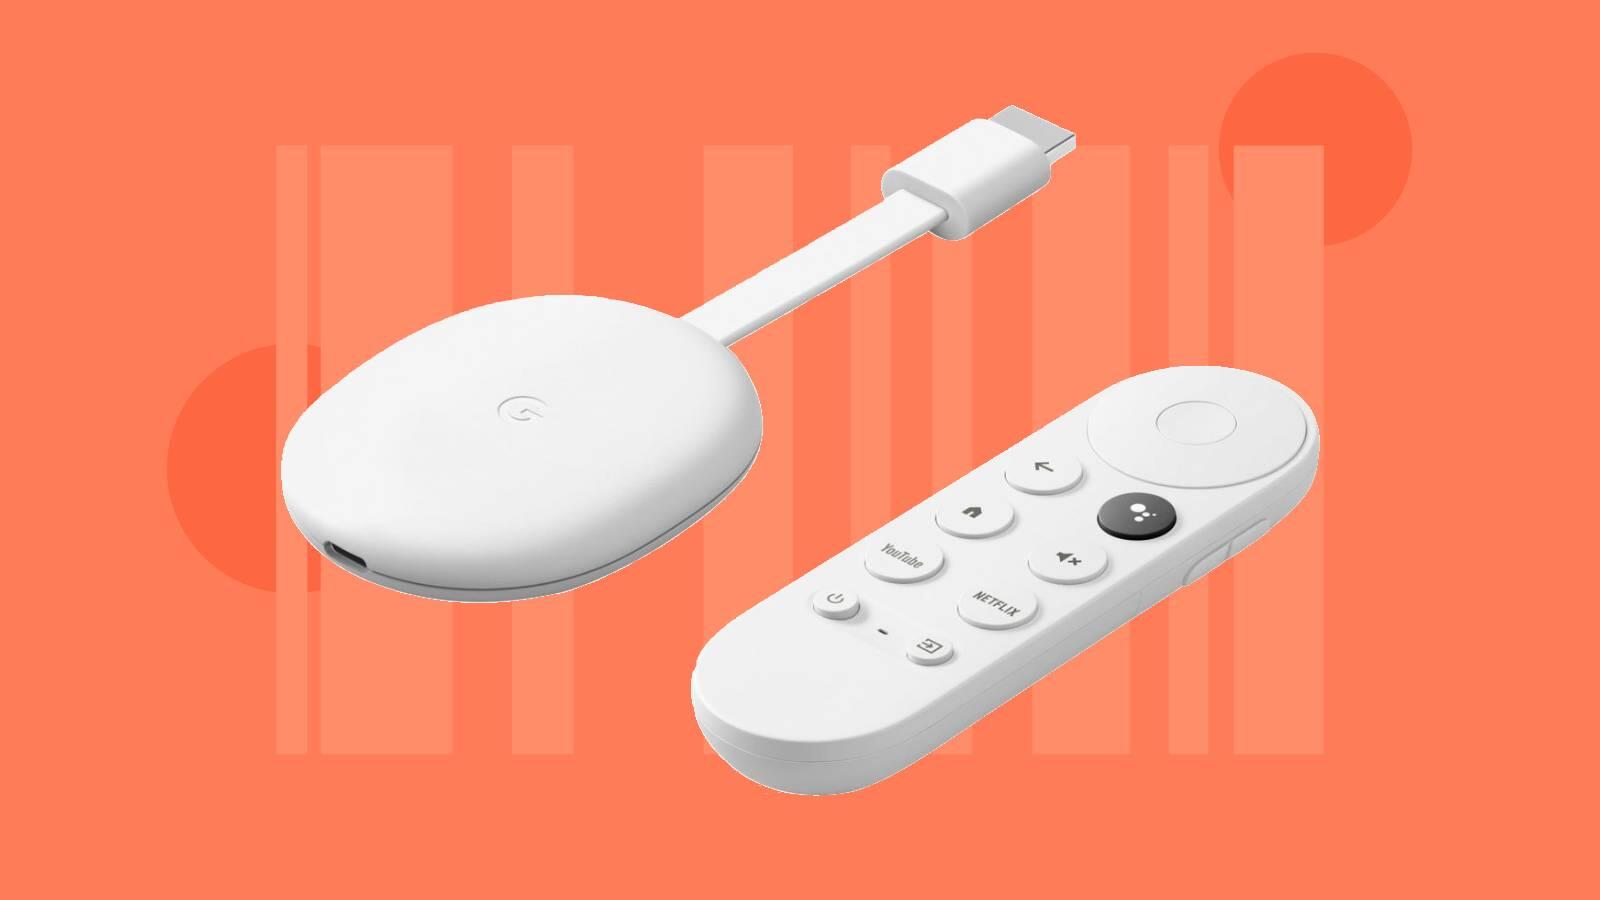 The 4K Chromecast with Google TV drops to a new low of $38 for Black Friday